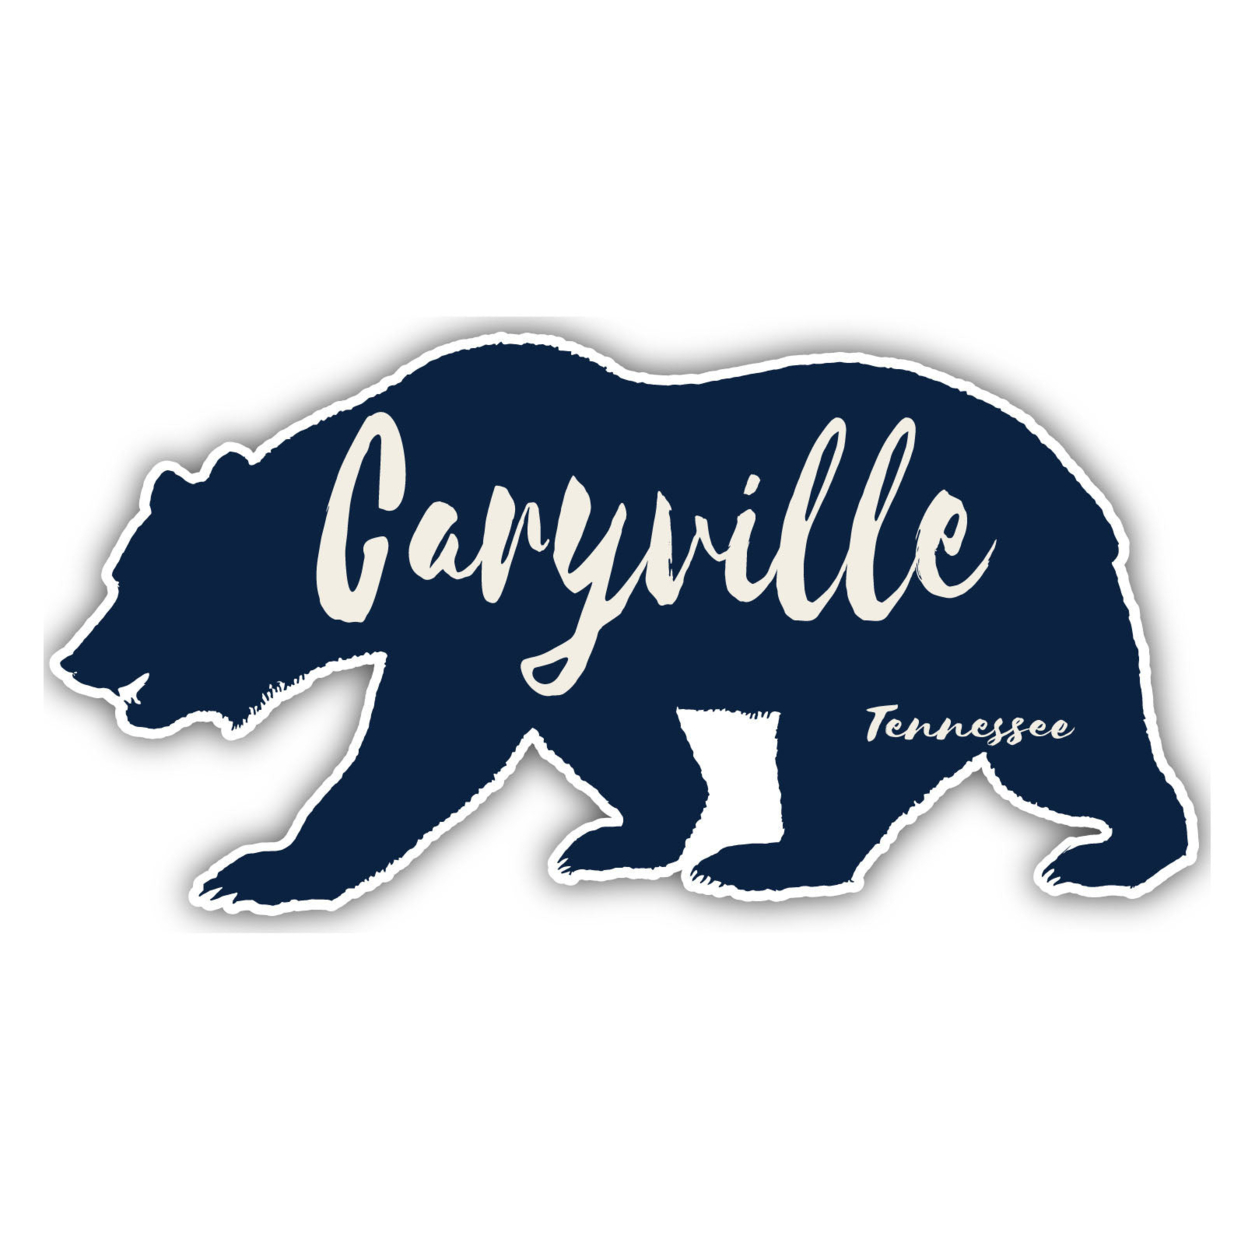 Caryville Tennessee Souvenir Decorative Stickers (Choose Theme And Size) - Single Unit, 6-Inch, Bear